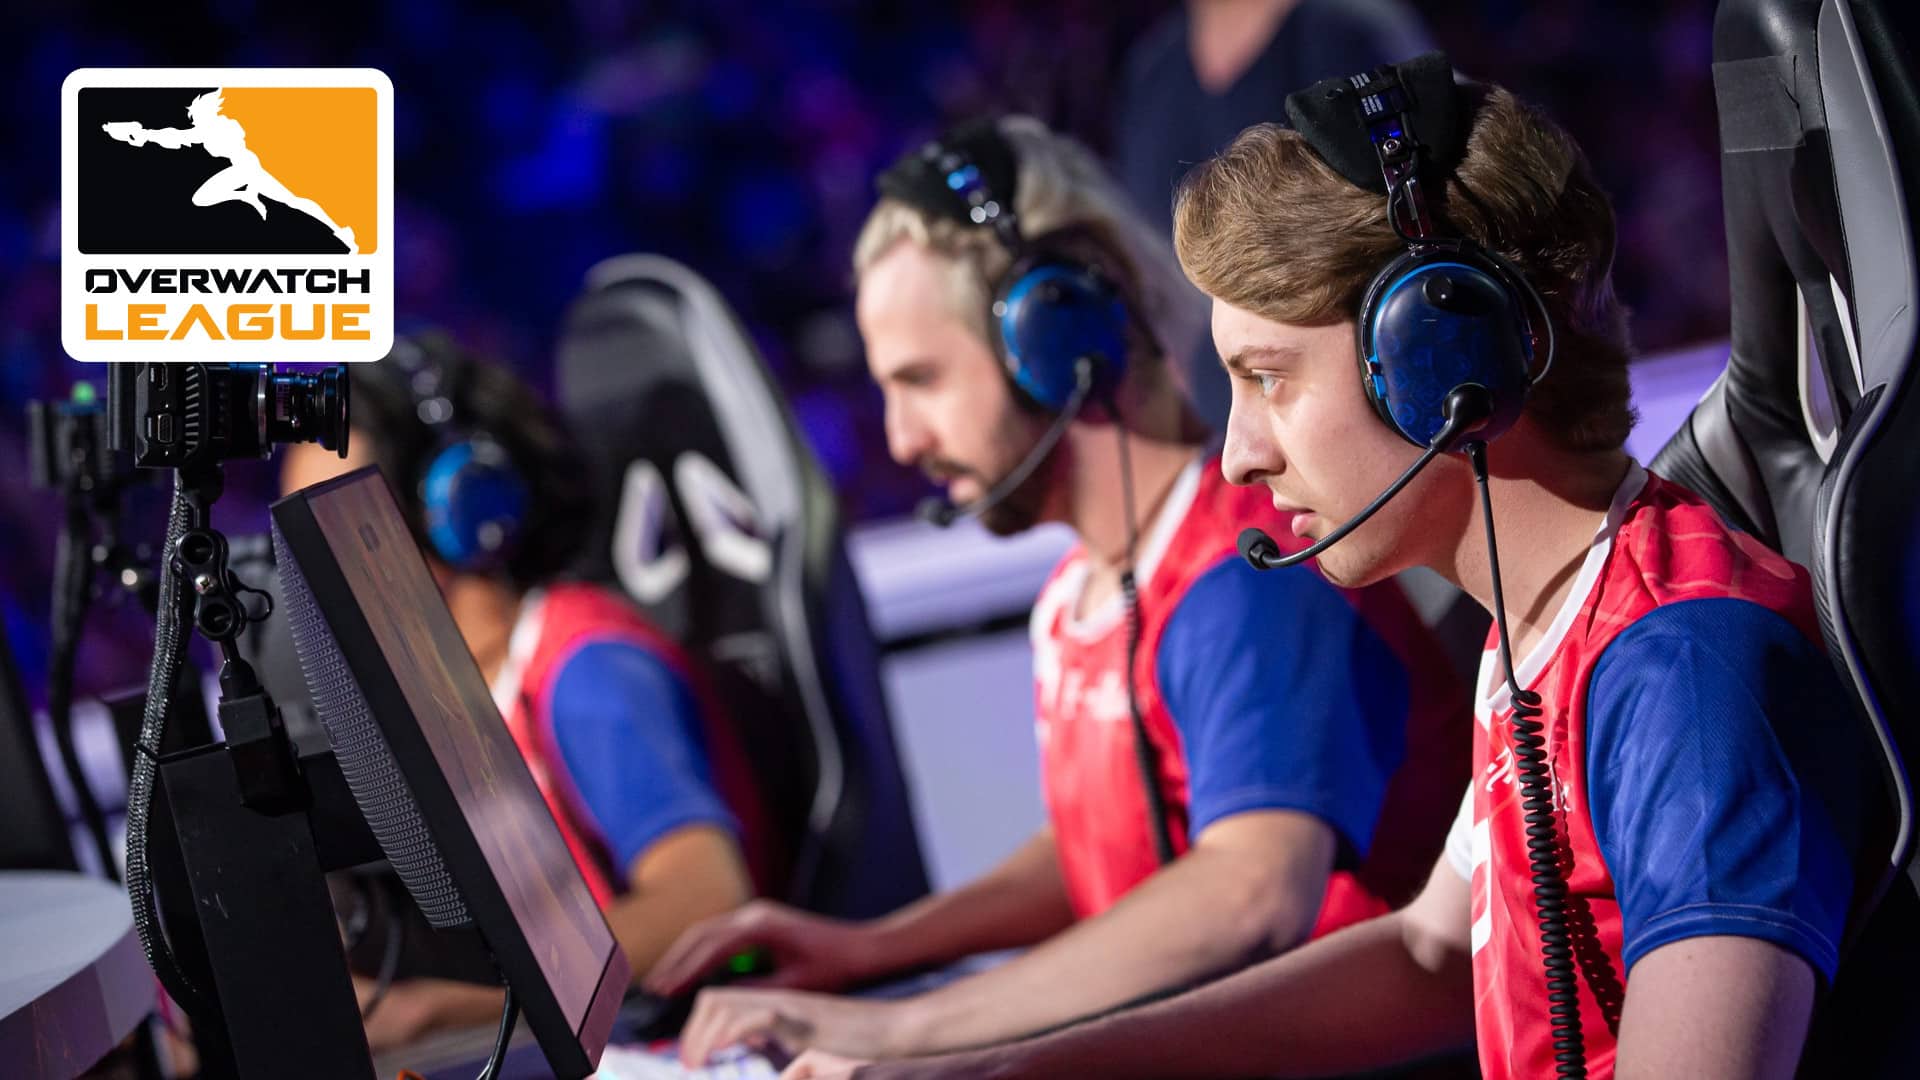 OWL World Cup team USA players compete on stage